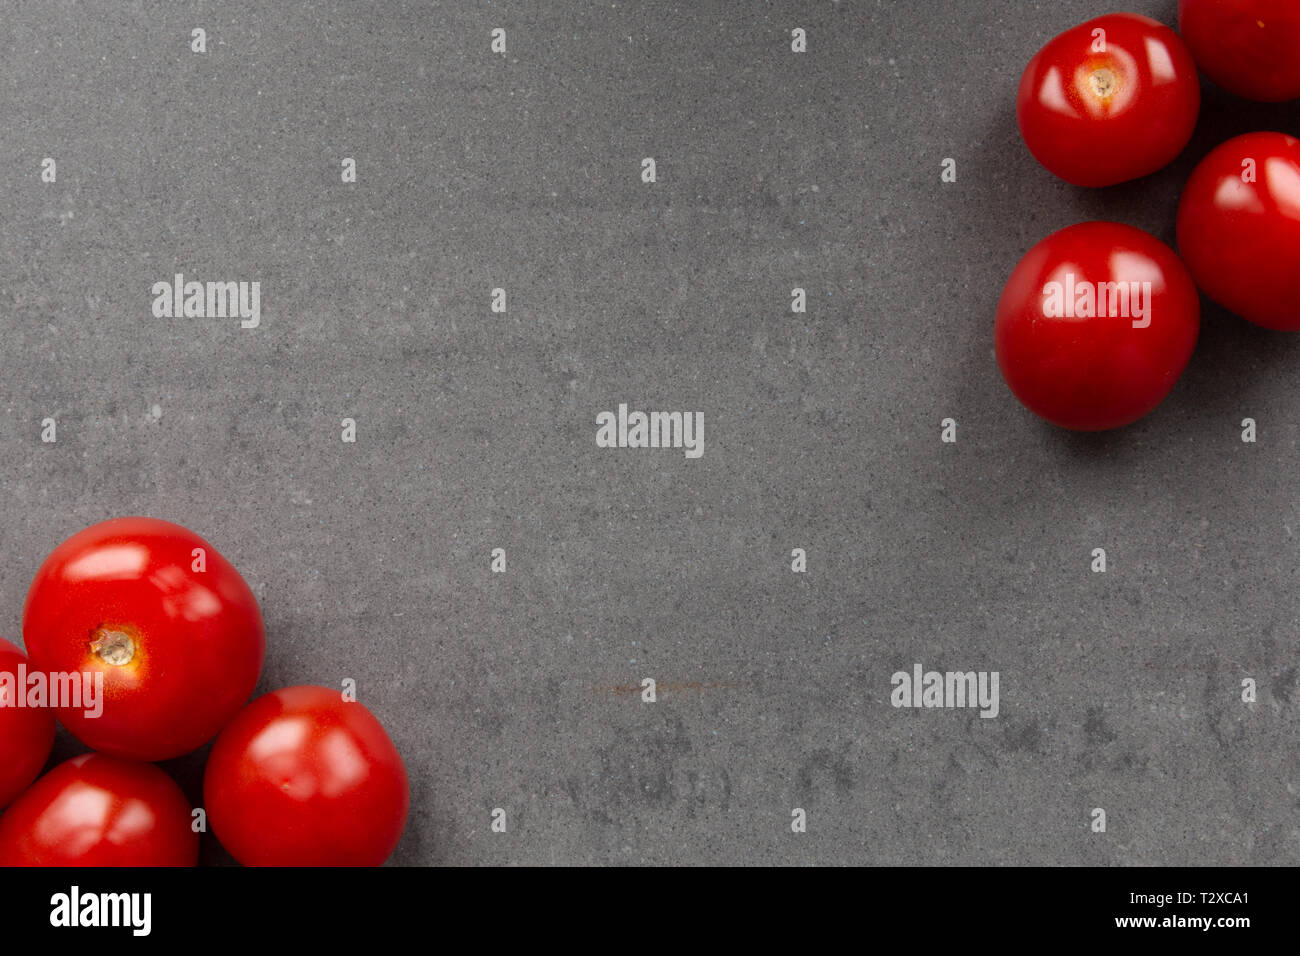 red cherry tomatoes en each corner of frame. Gray background Stock Photo